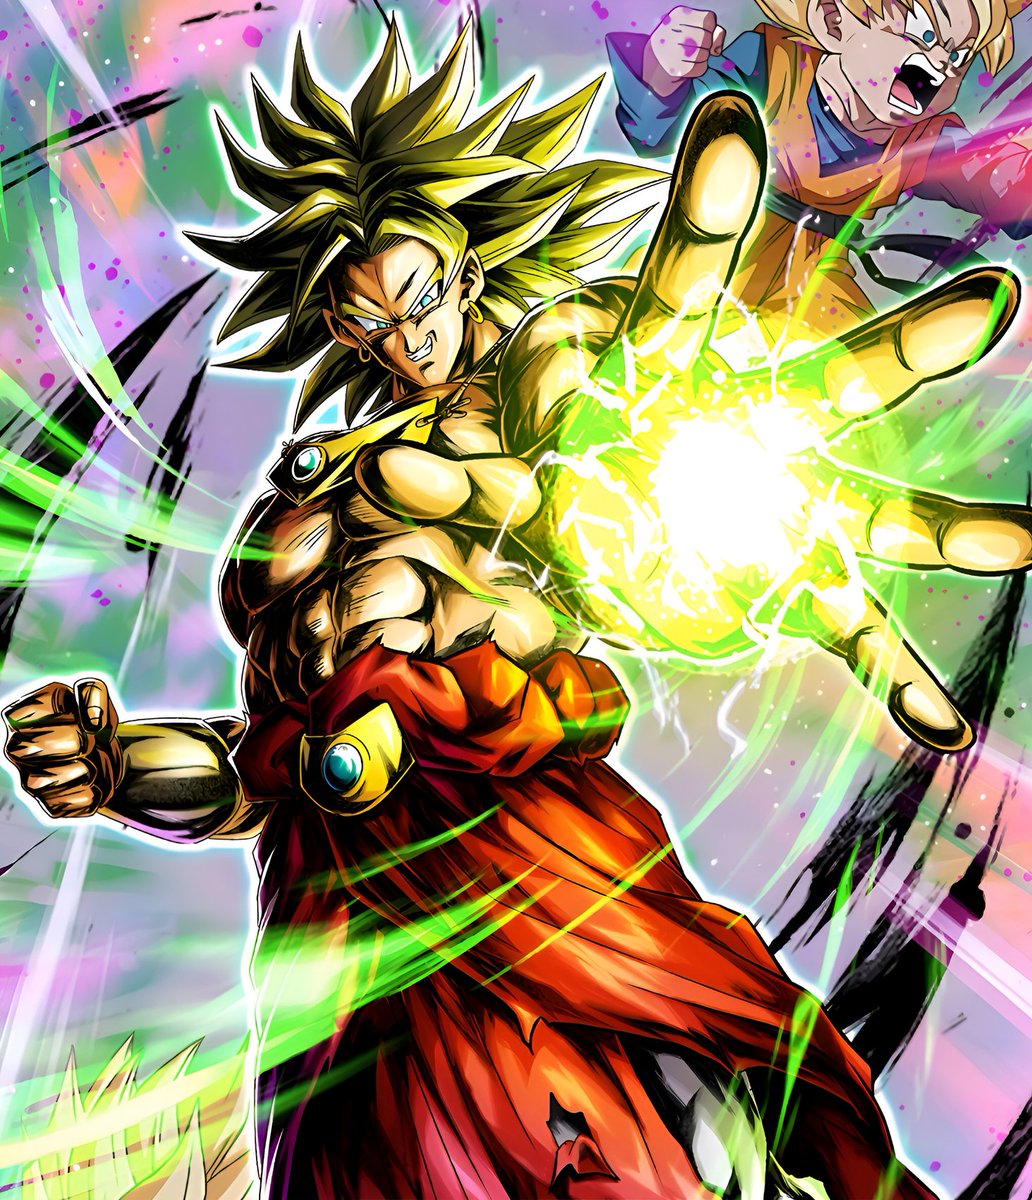 While Dragon Ball Legends Always Treat Z Broly Like Shit

They Never Screw Up With His Art. Always Peak To See